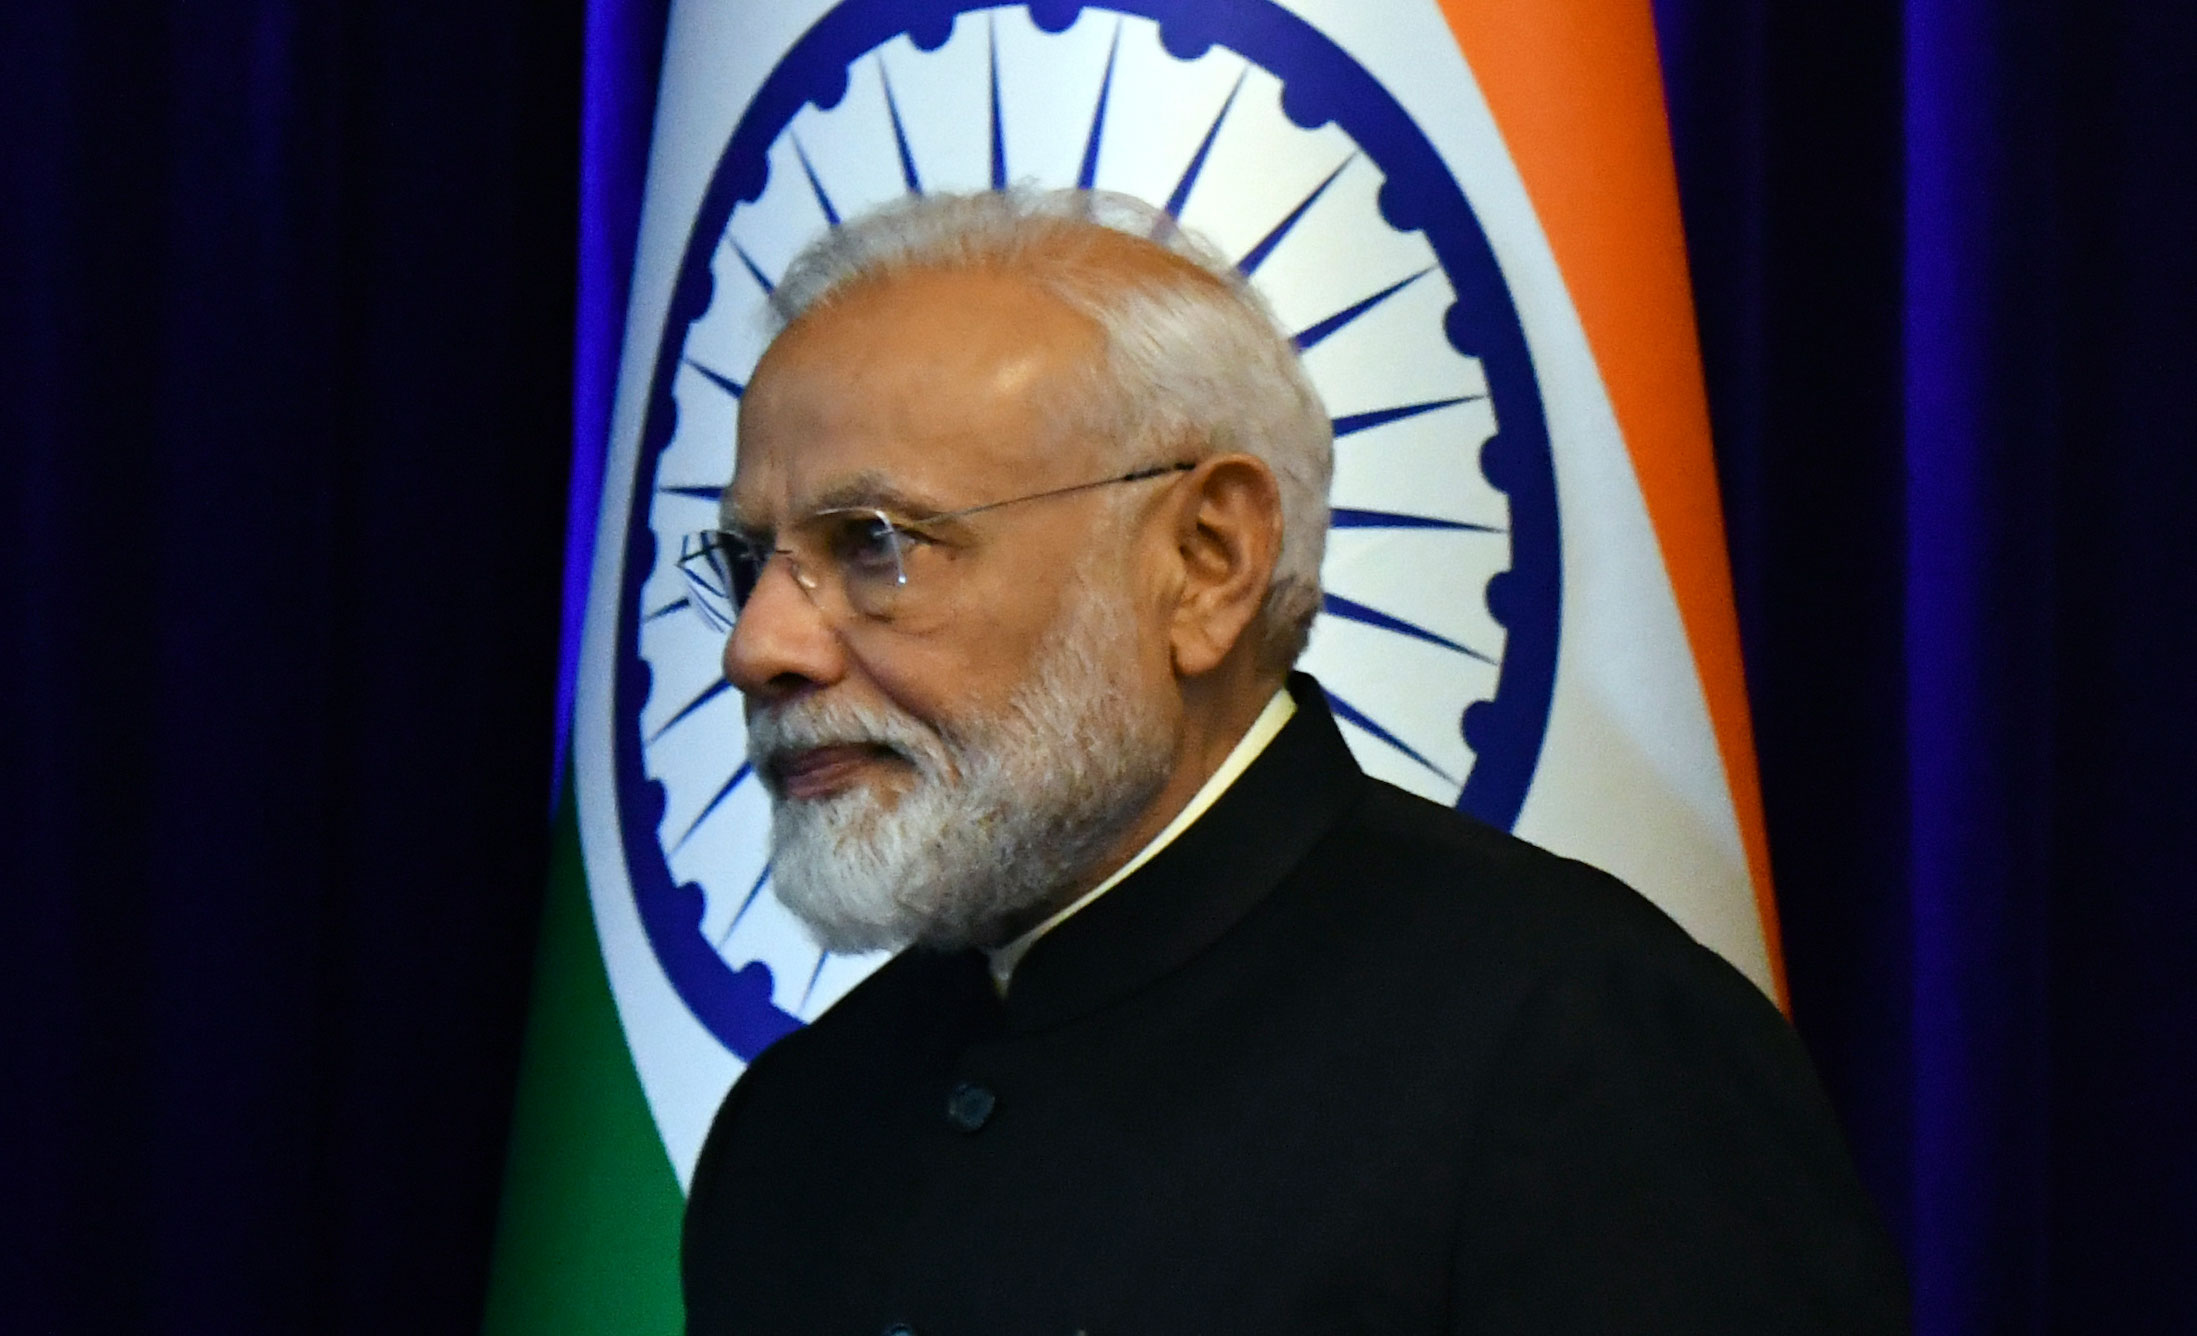 Prime Minister Narendra Modi’s Independence Day call to arrest the “population explosion”, echoing a longstanding Sangh parivar demand, has set off speculation within the BJP about an impending law on population control.